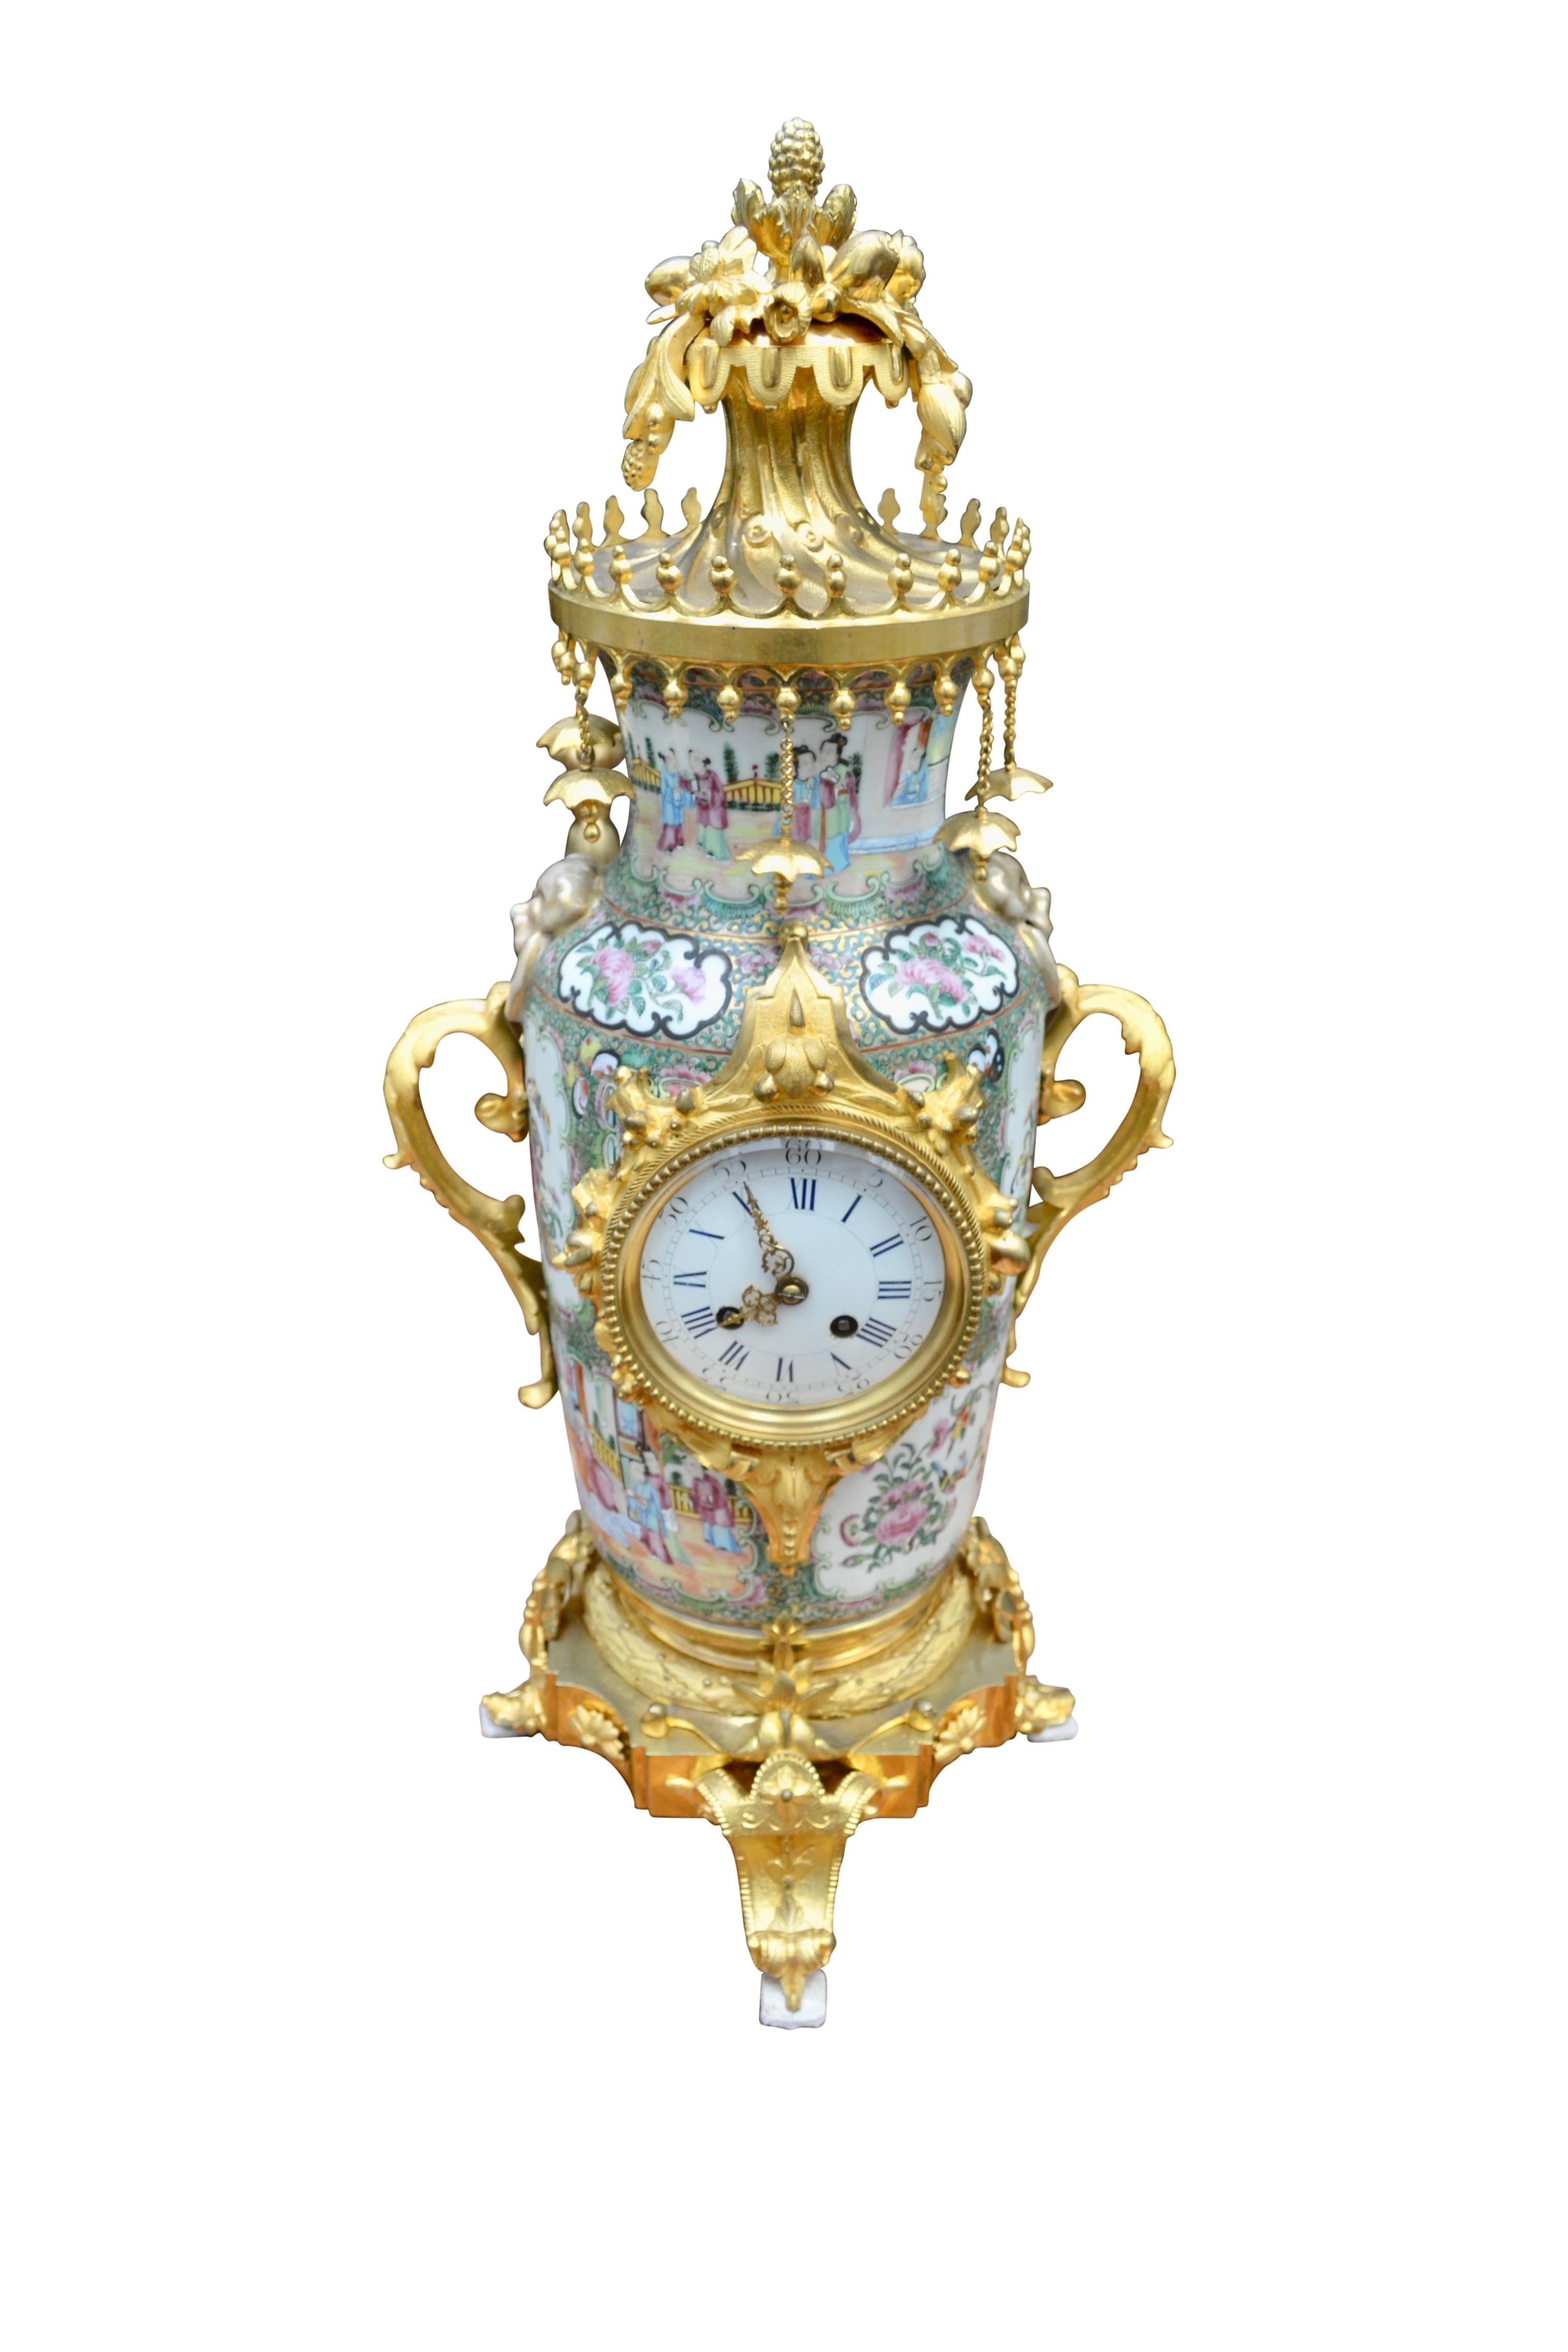 A fine and rare large scale Chinese porcelain and gilt bronze mantle clock , the body of the in hand painted rose medallion design, (famille rose), and richly embellished with finely chased and gilded bronze mounts. The porvelain pis painted with